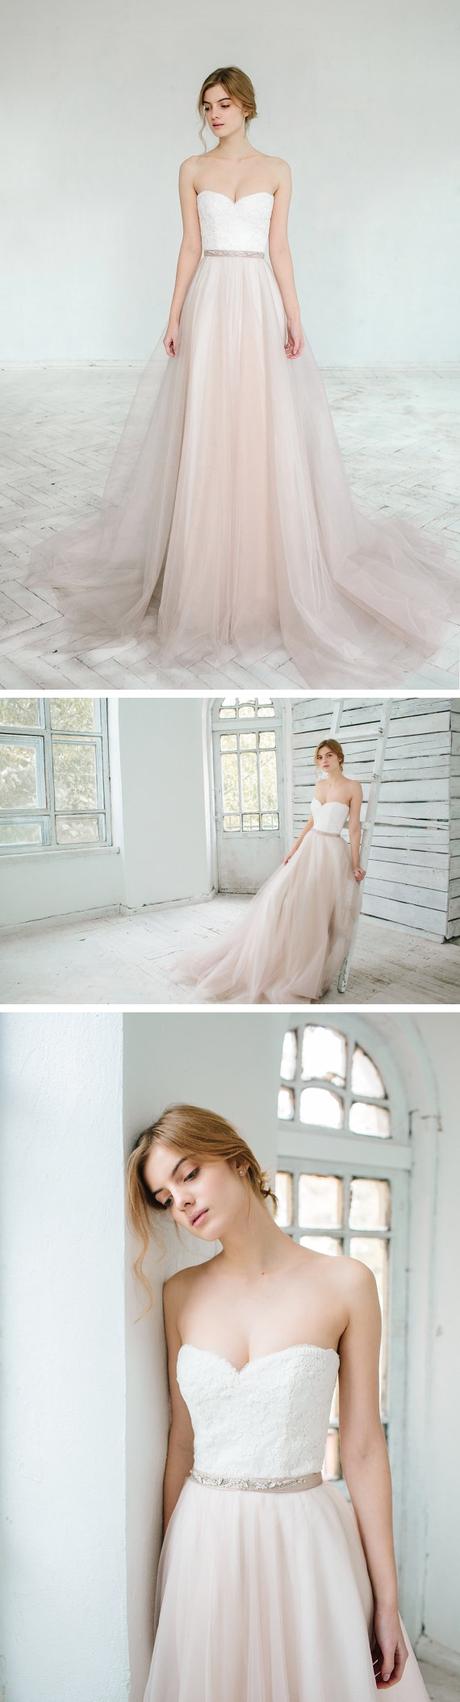 Wedding Dress Of The Week – For A Blushing Bride